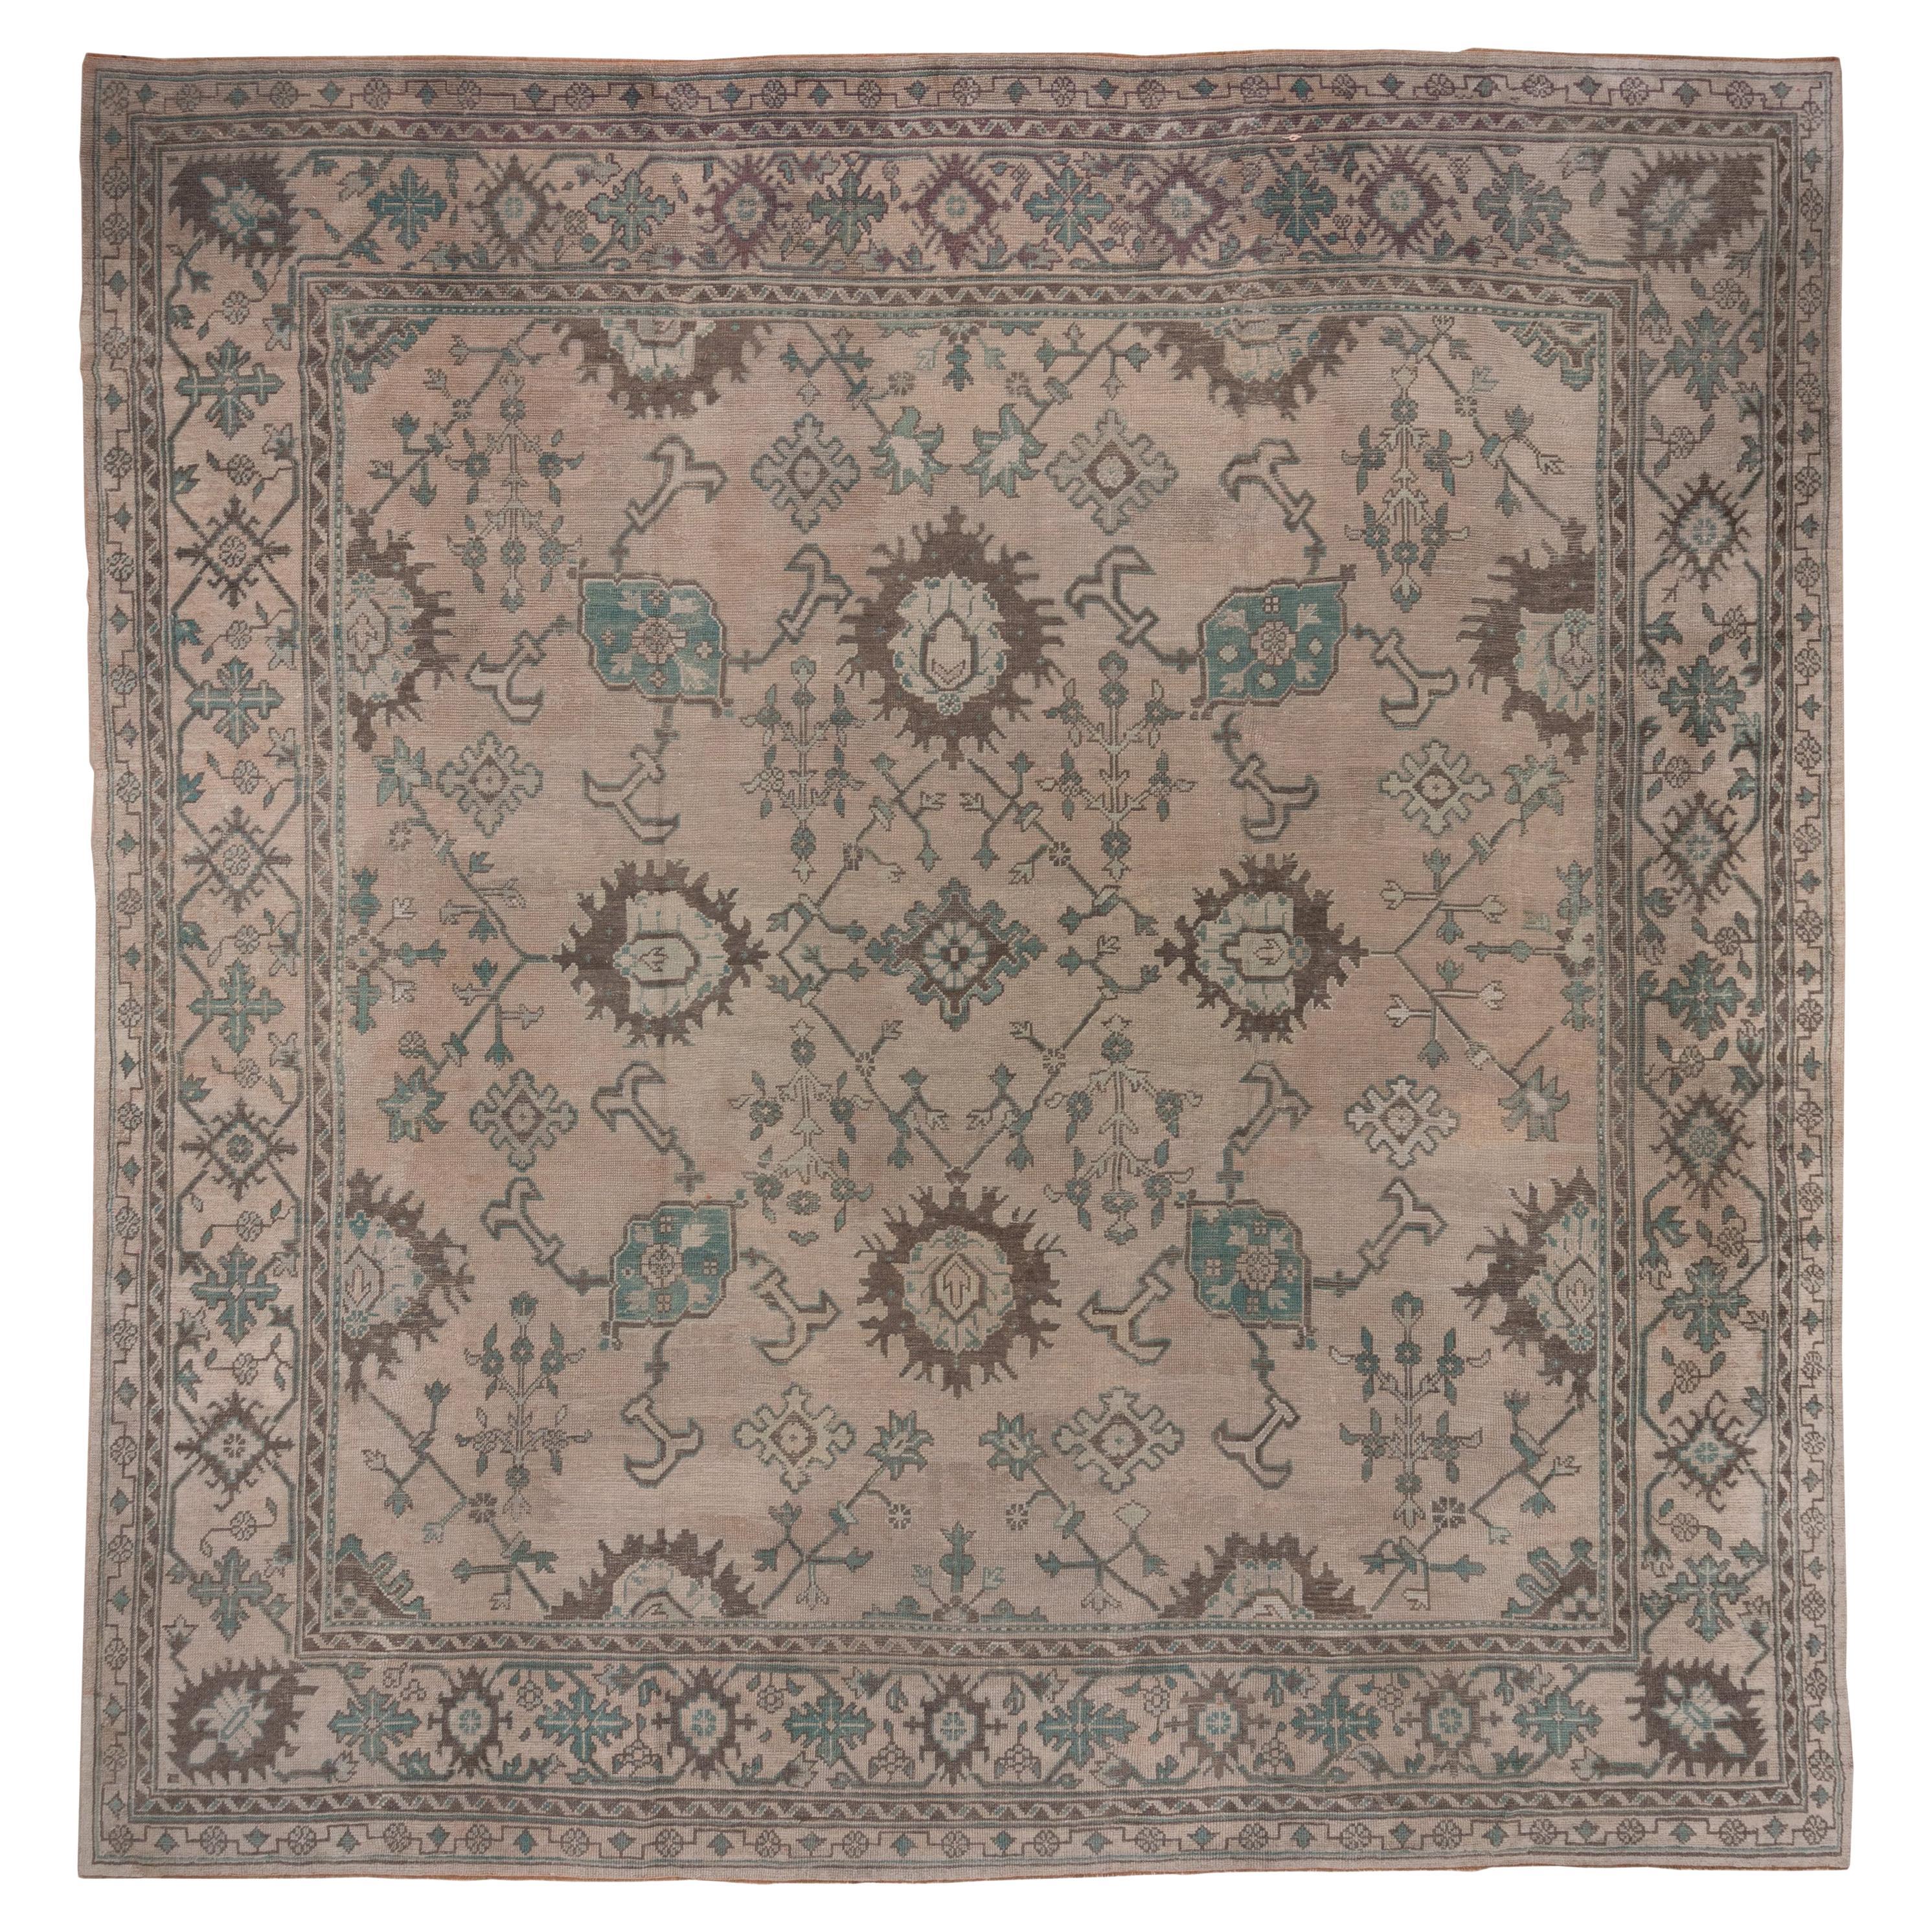 Beautiful Antique Square Oushak Carpet, Brown Allover Field & Green Accents